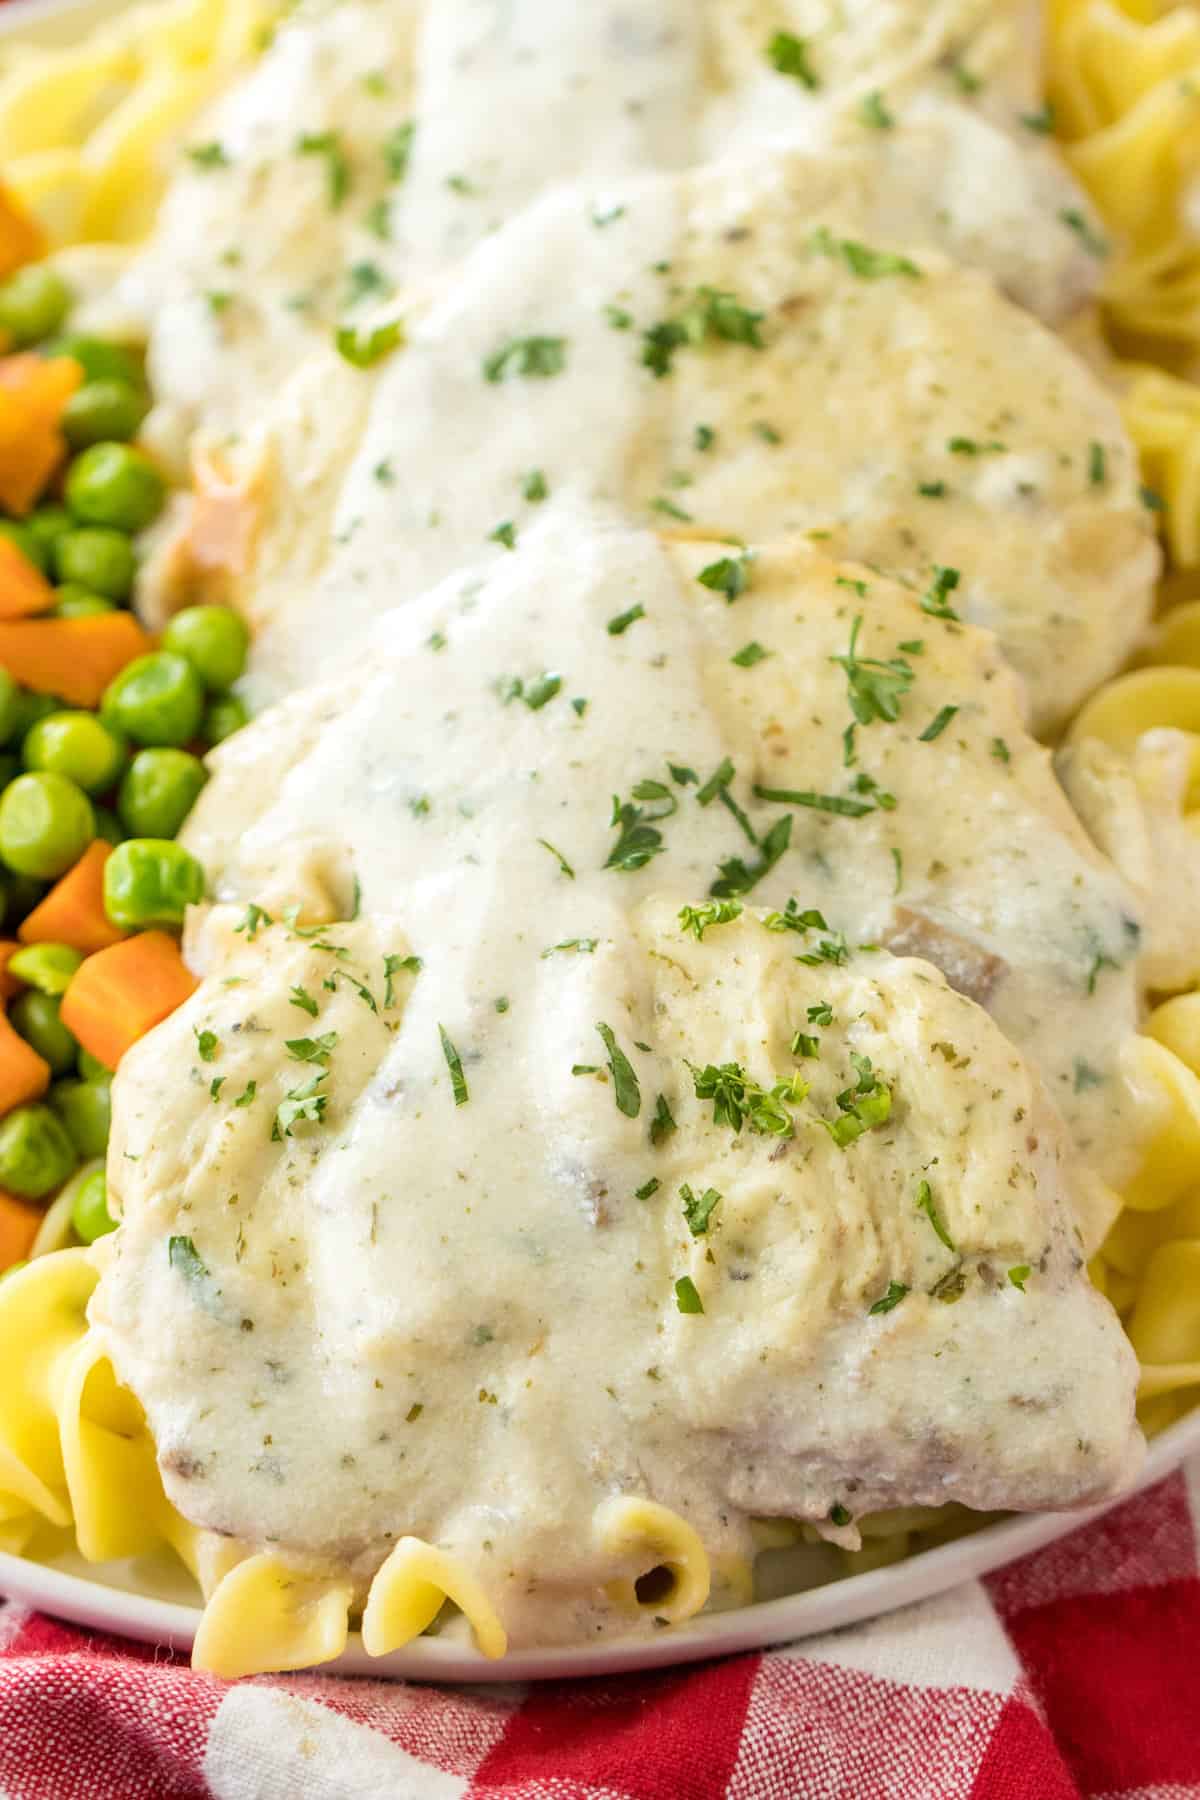 Creamy oven baked pork chops with cream of mushroom sauce and parsley garnish served with noodles and mixed vegetables.